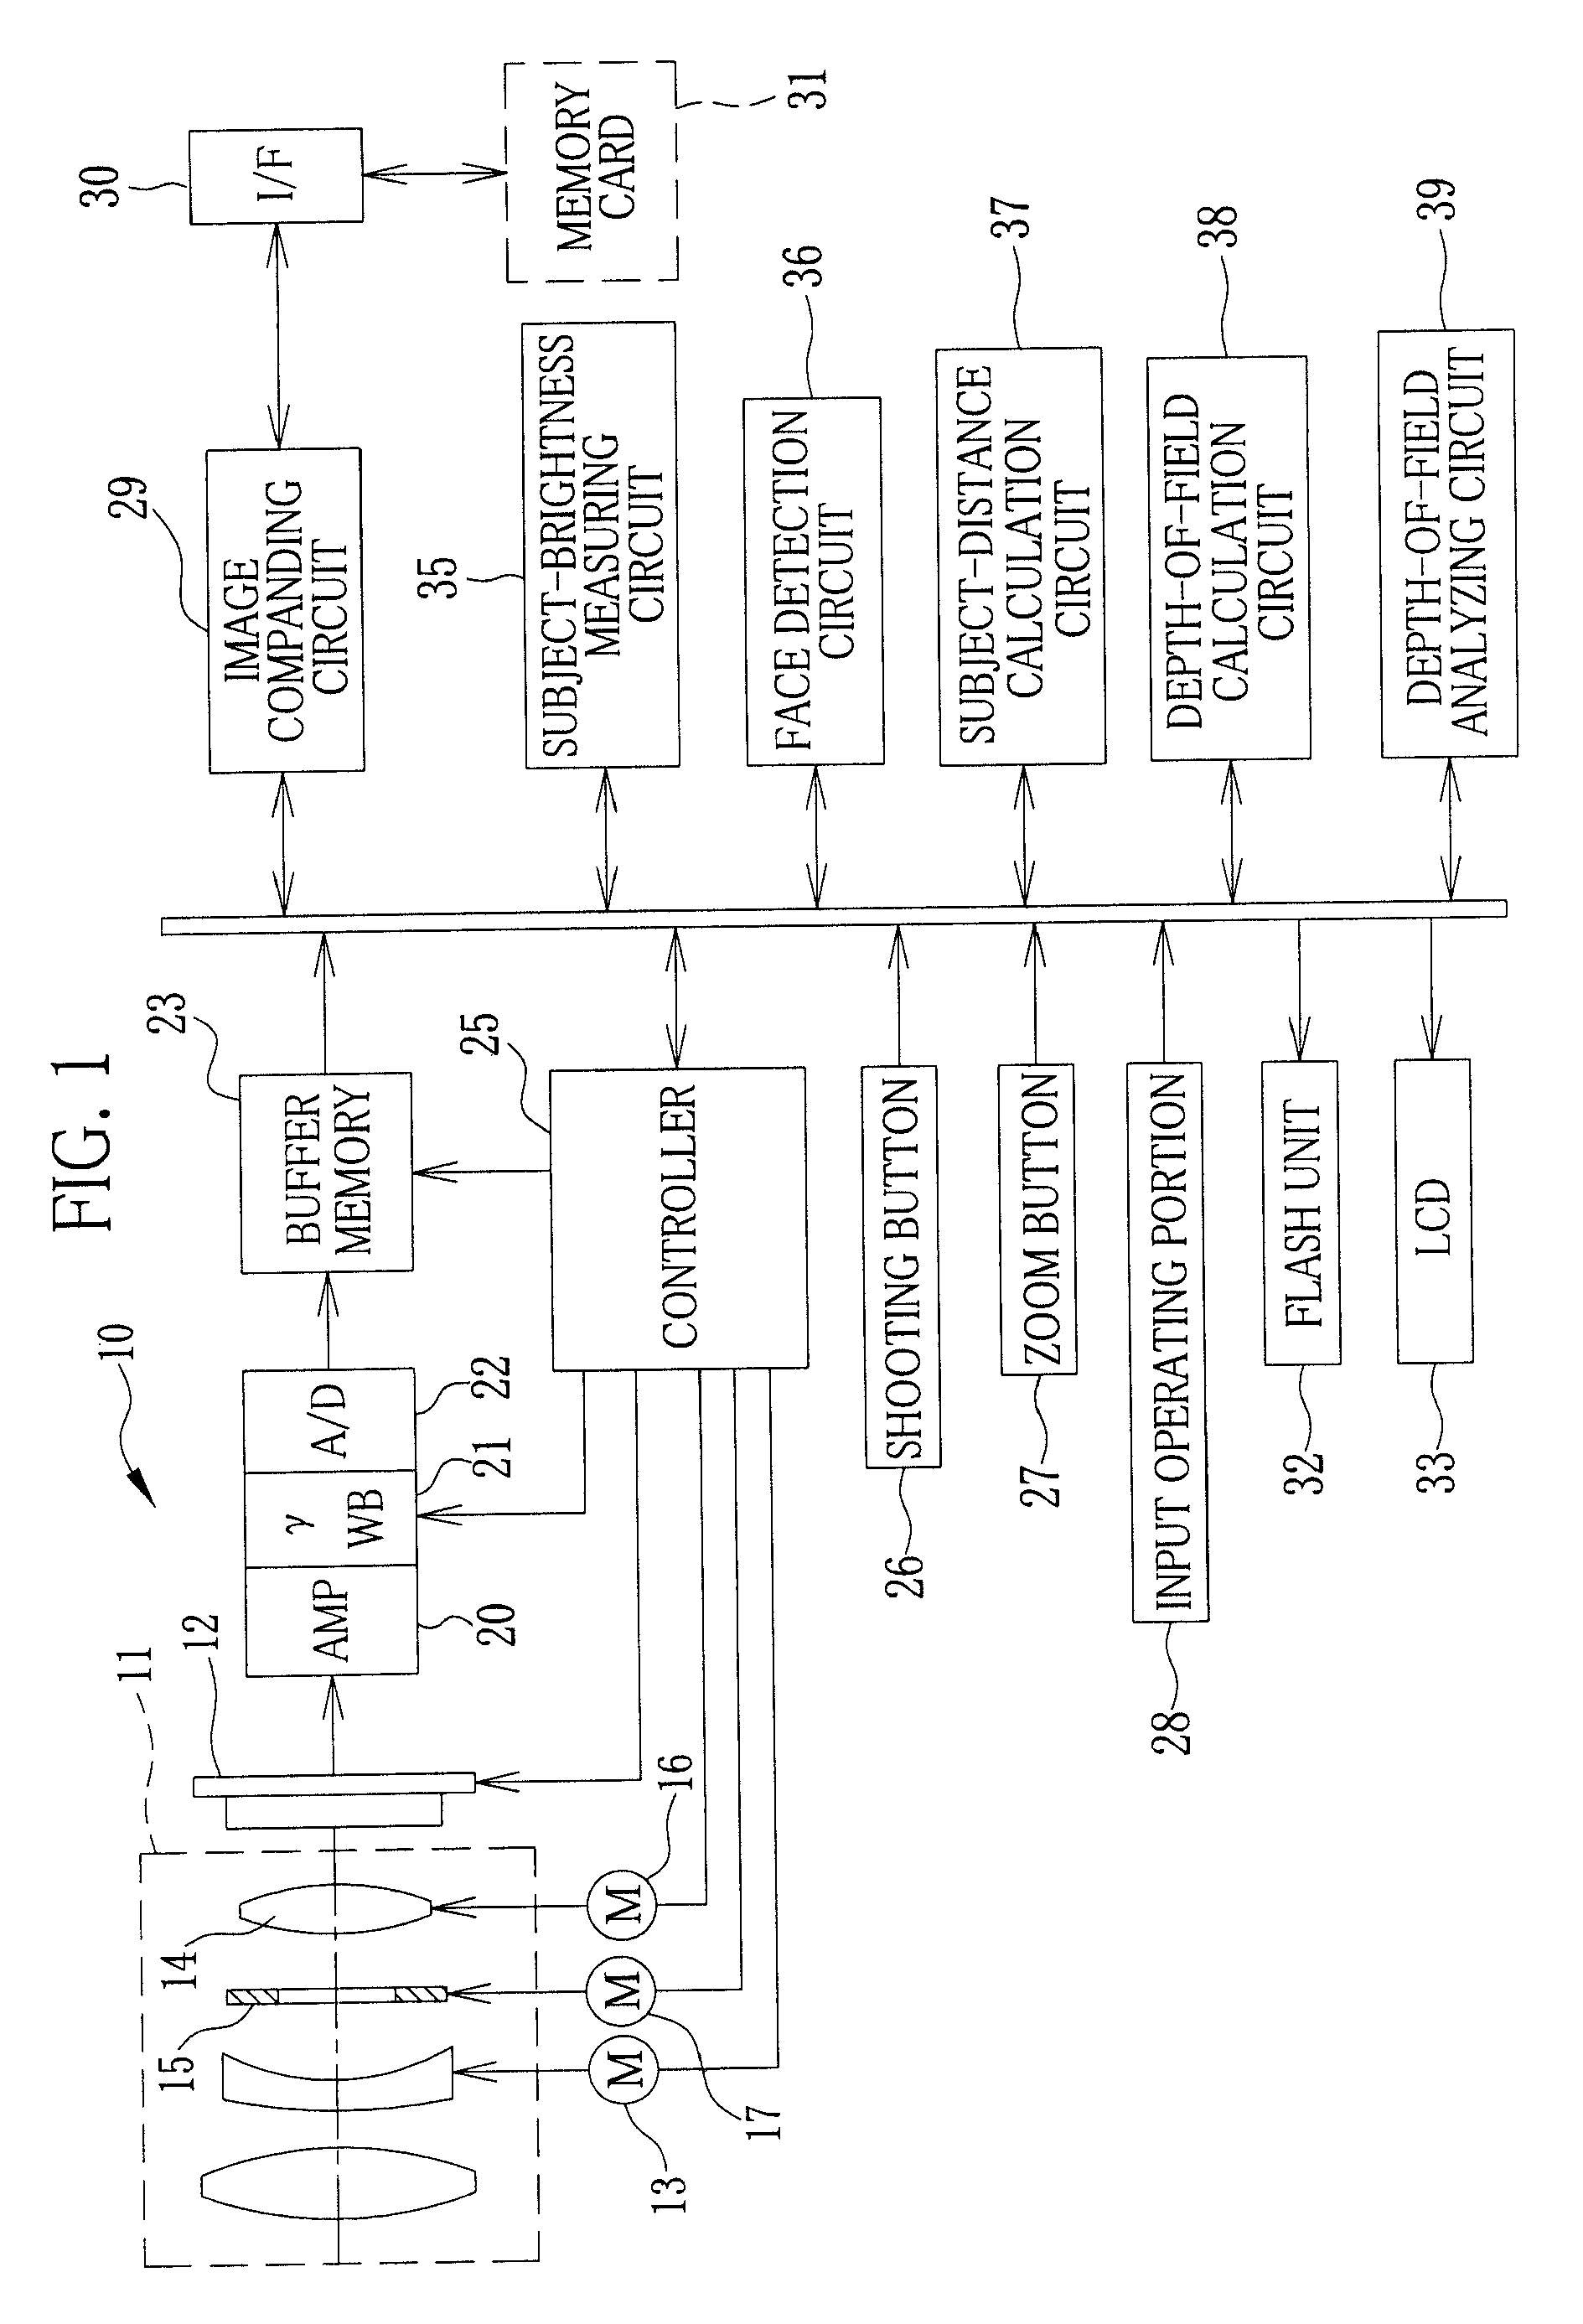 Imaging device performing focus adjustment based on human face information